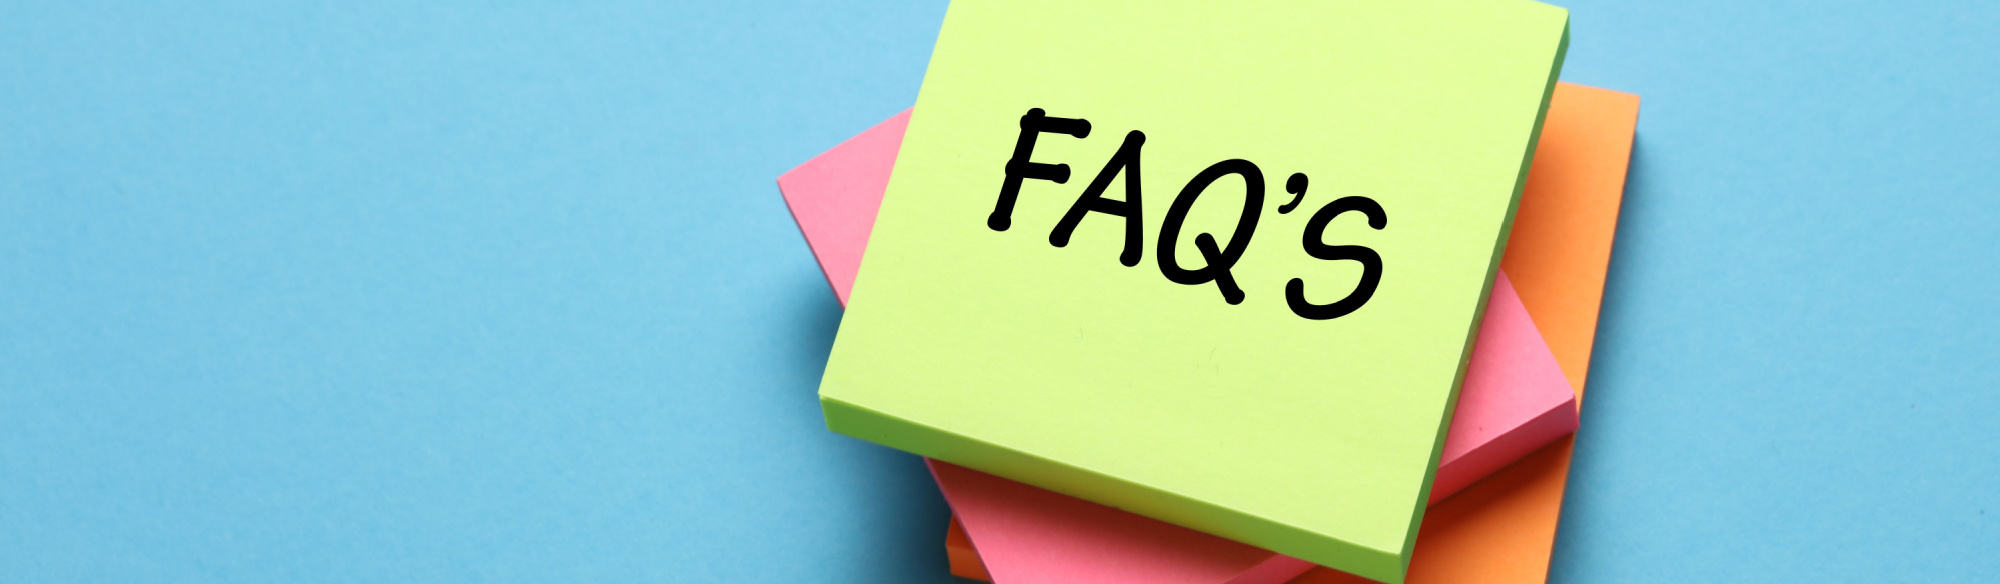 image of frequently asked questions